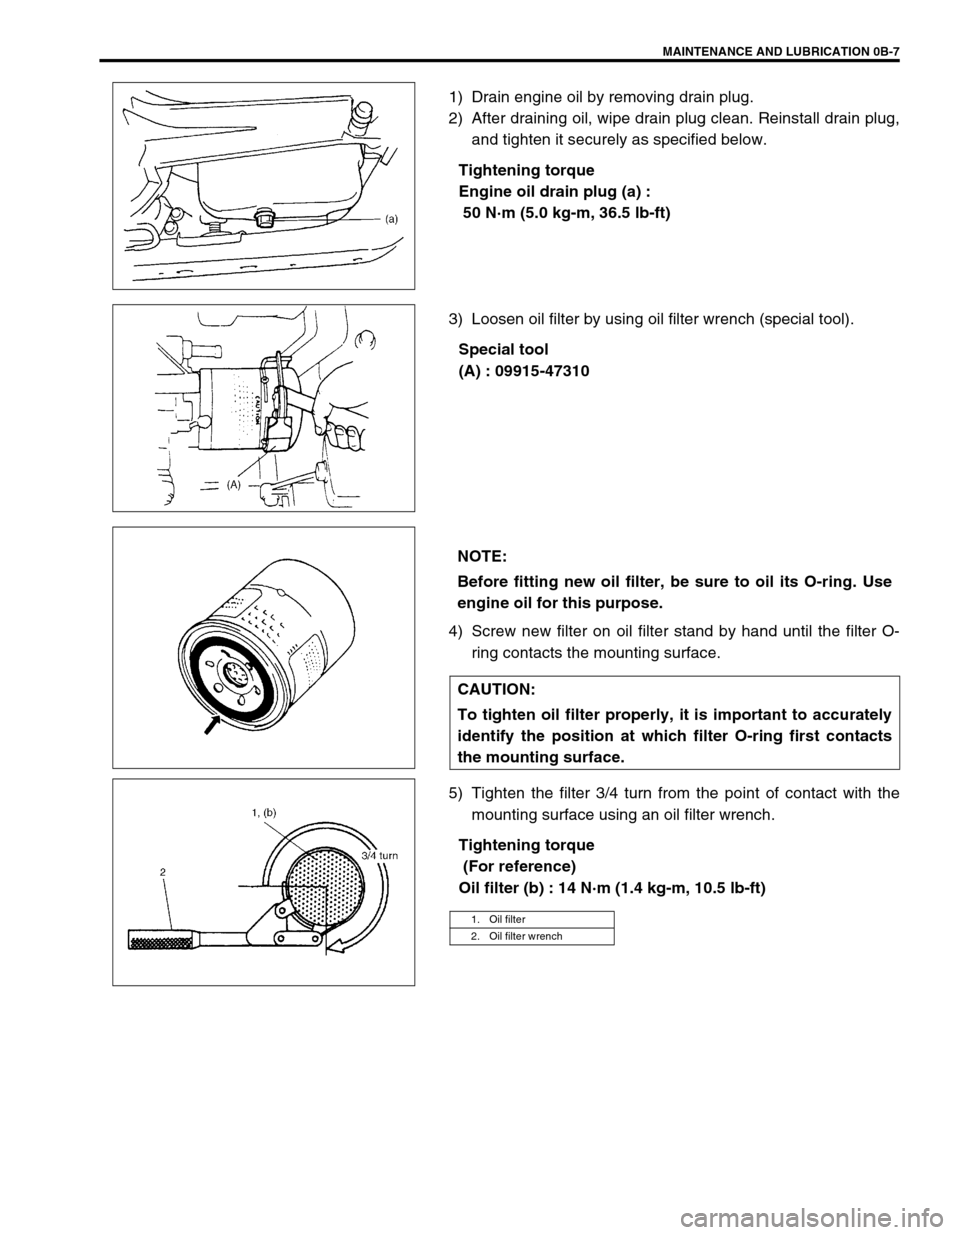 SUZUKI GRAND VITARA 2001 2.G User Guide MAINTENANCE AND LUBRICATION 0B-7
1) Drain engine oil by removing drain plug.
2) After draining oil, wipe drain plug clean. Reinstall drain plug,
and tighten it securely as specified below.
Tightening 